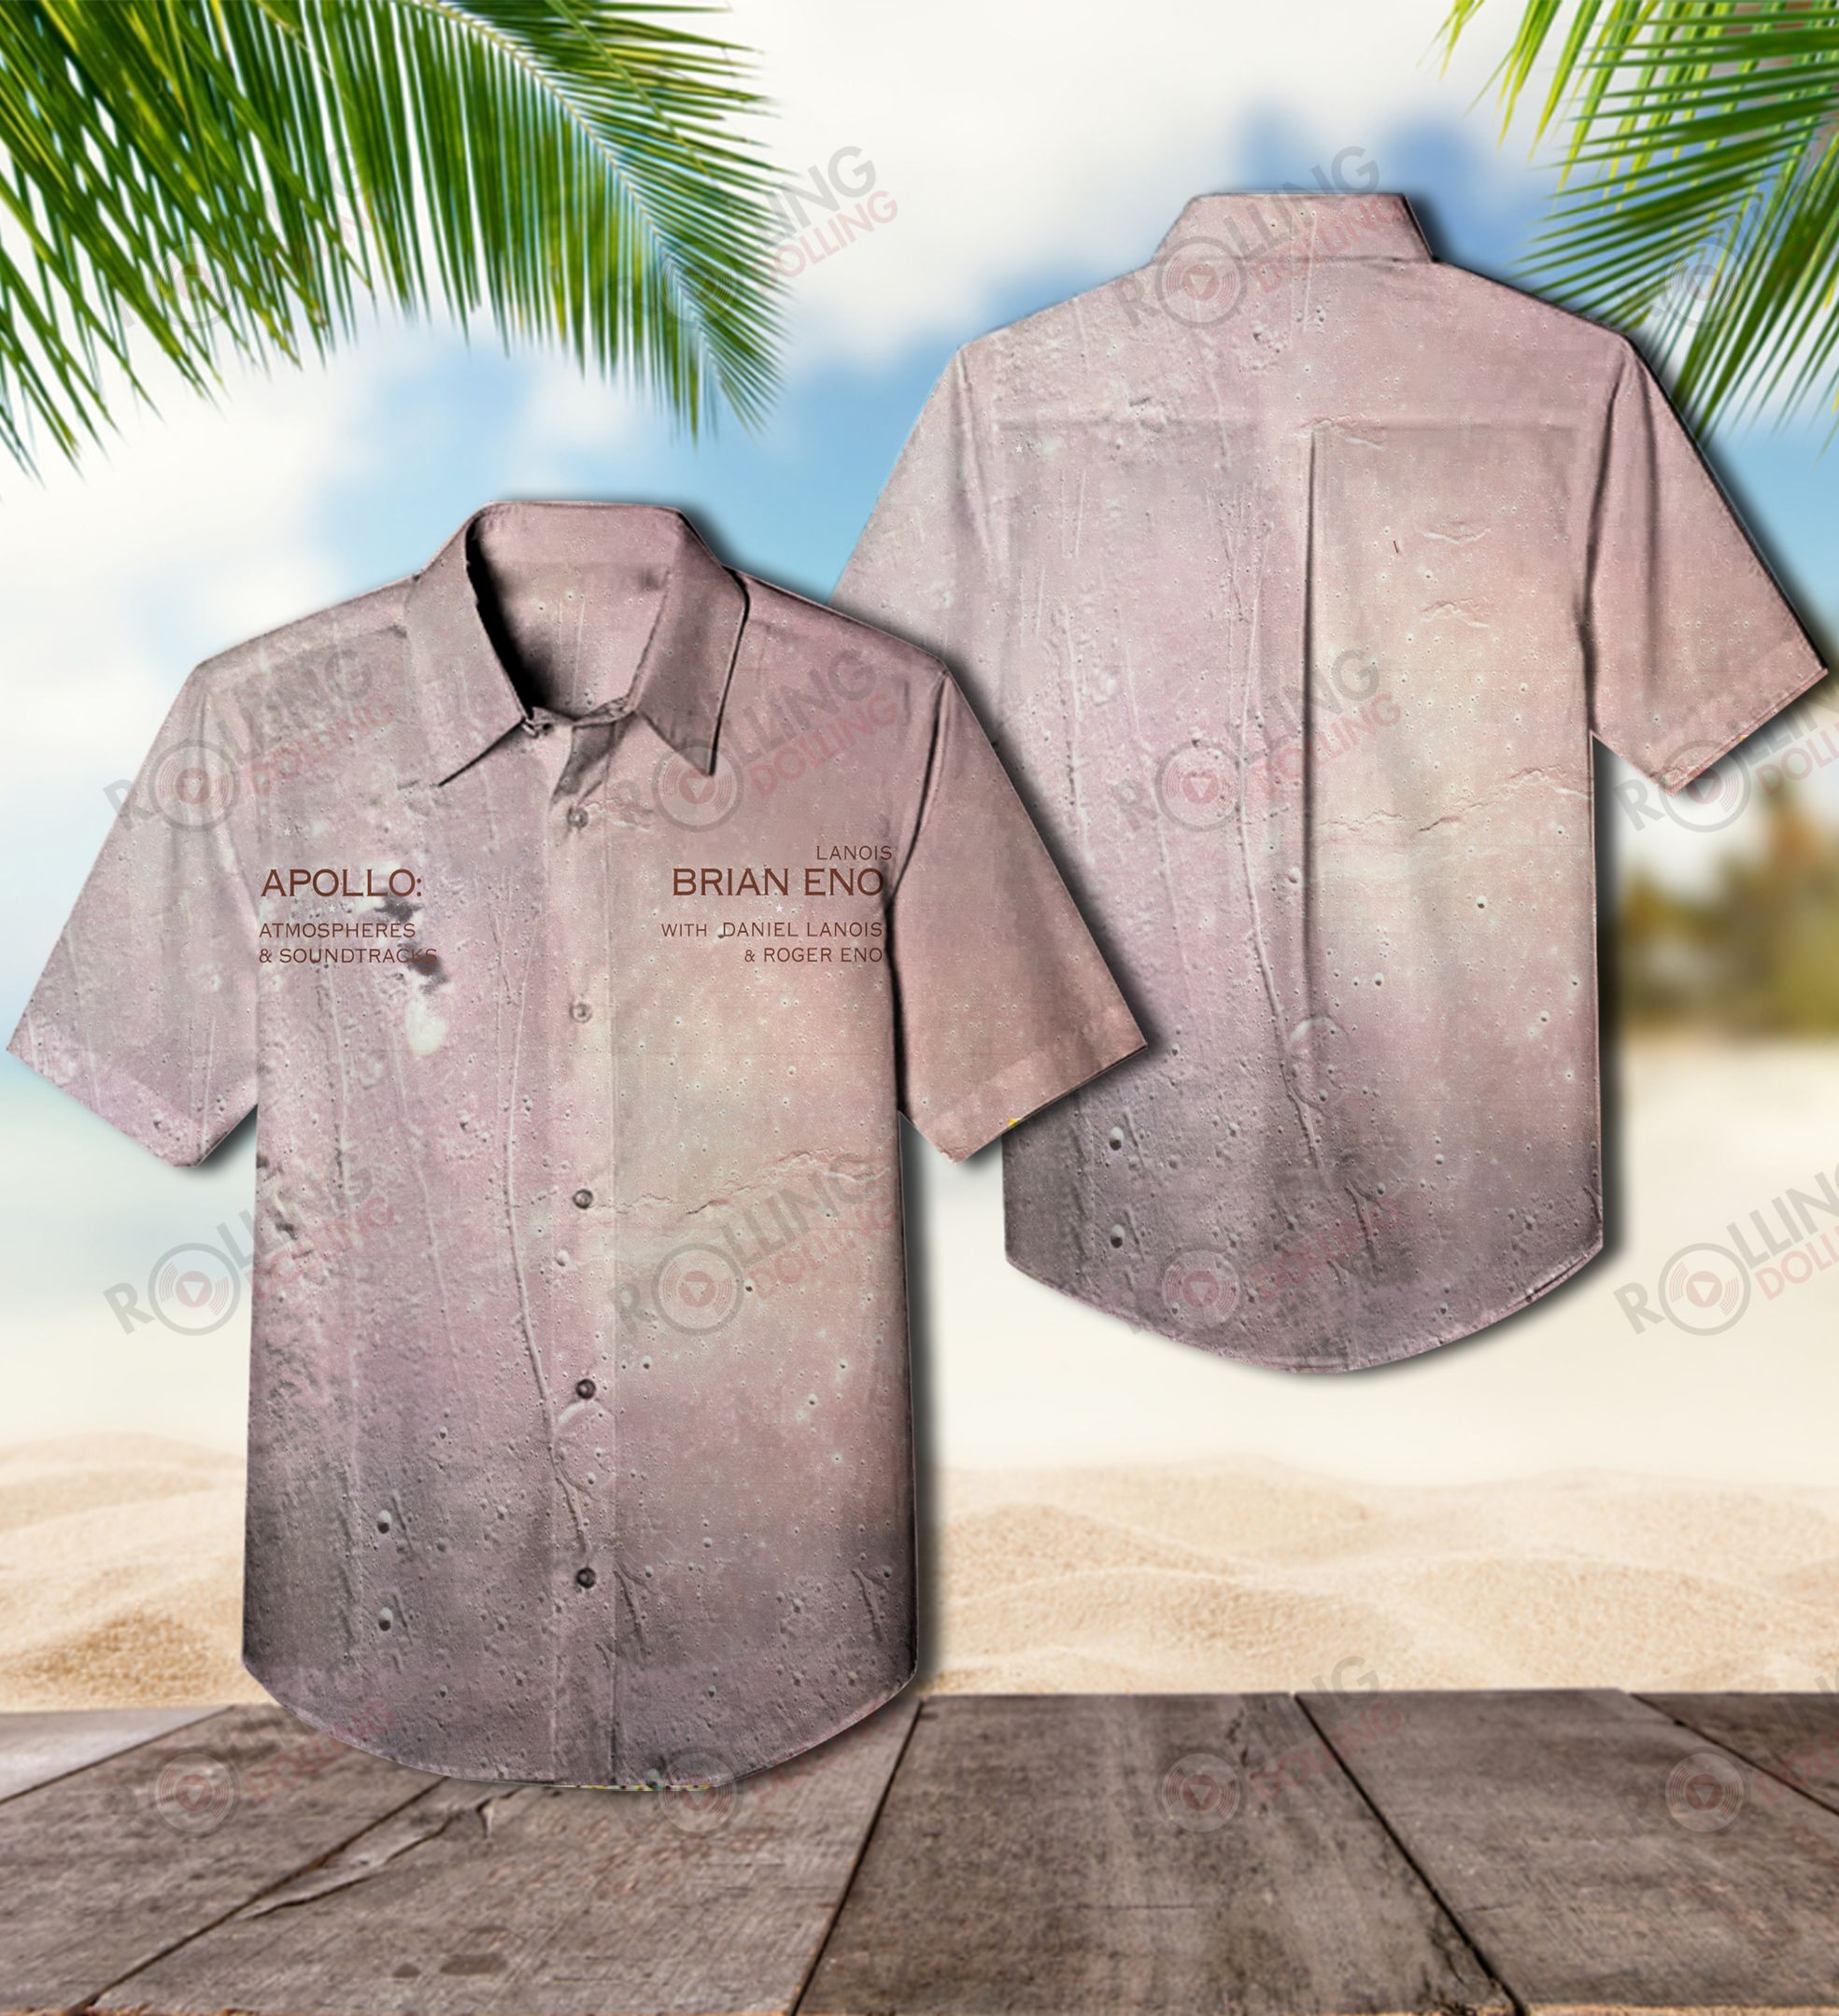 For summer, consider wearing This Amazing Hawaiian Shirt shirt in our store 153